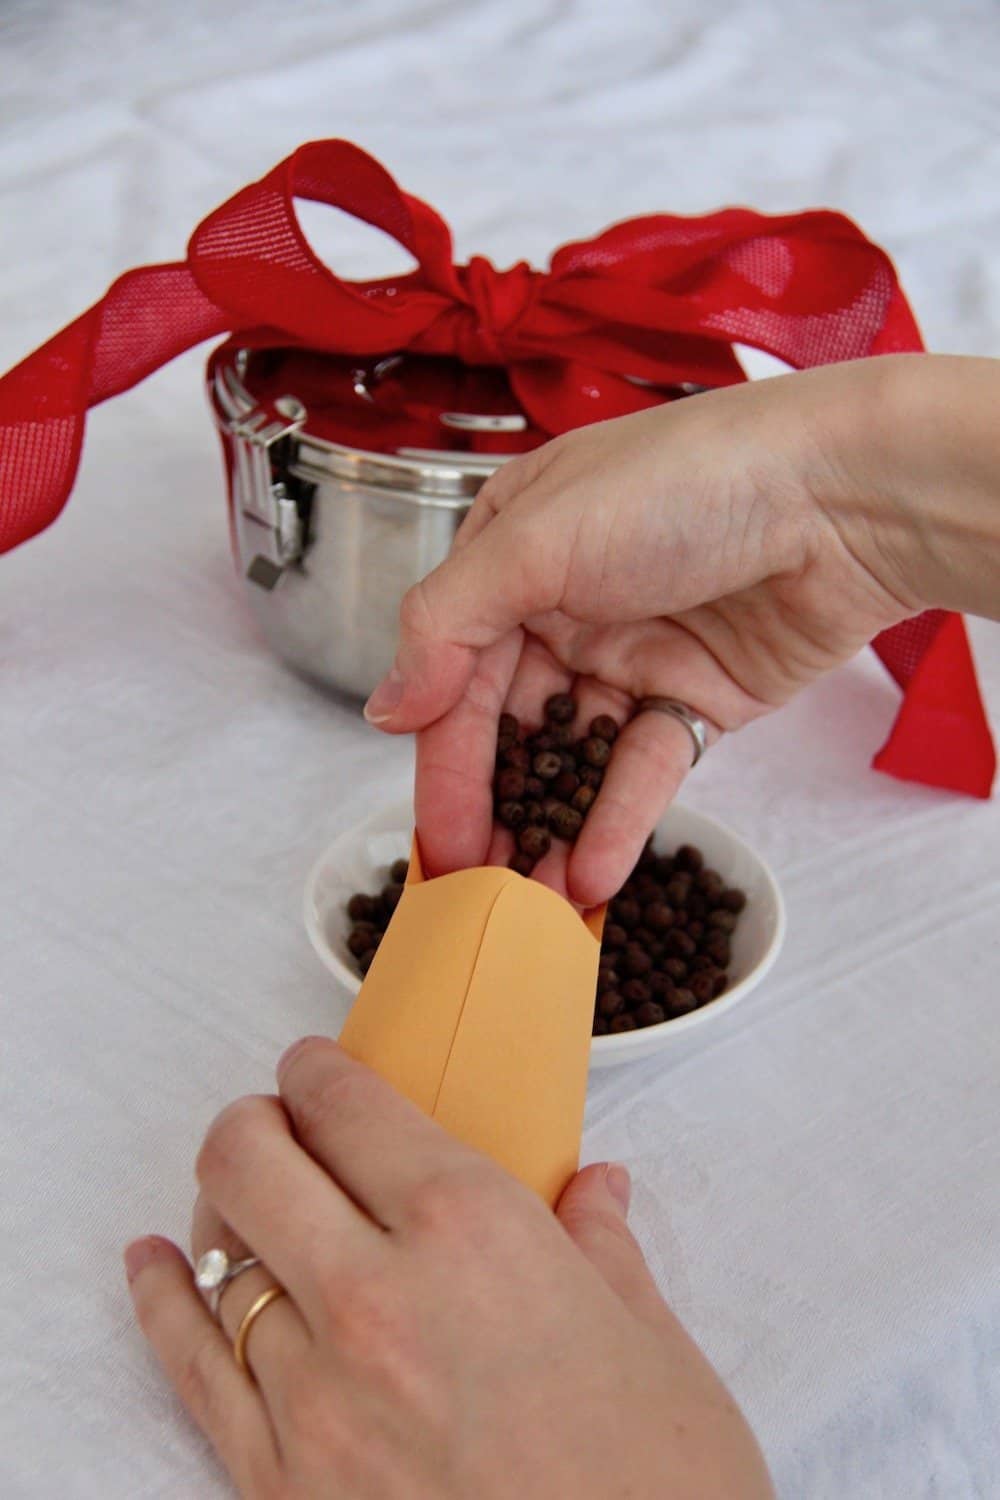 Two hands pouring seeds into a small envelope to make a diy valentine gift